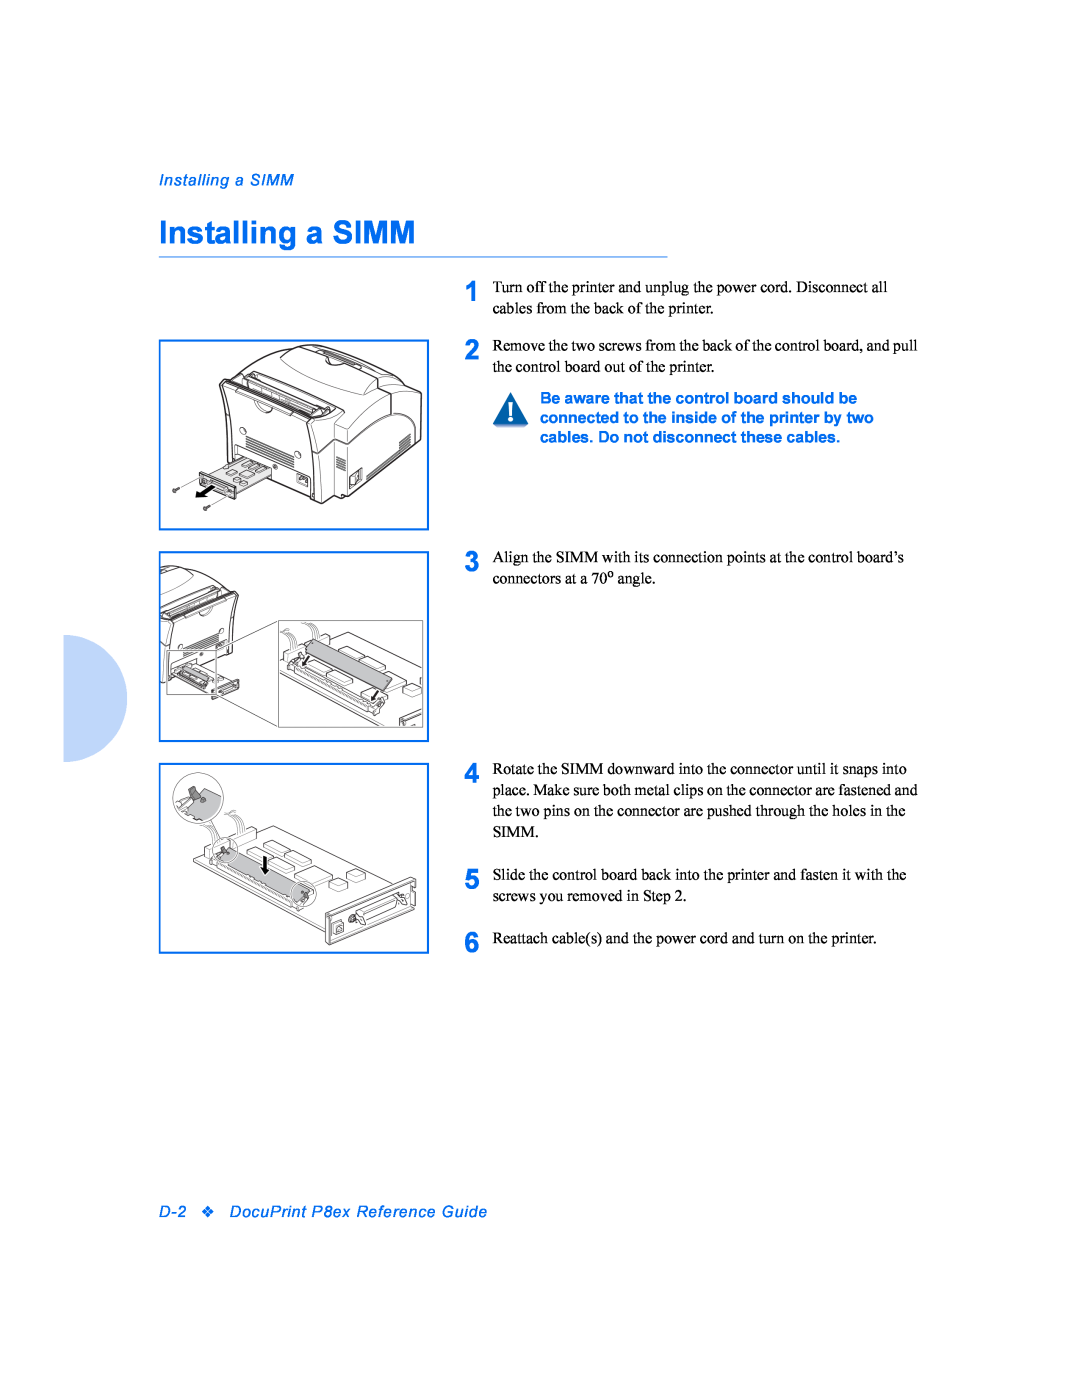 Xerox P8EX manual Installing a SIMM, D-2DocuPrint P8ex Reference Guide 